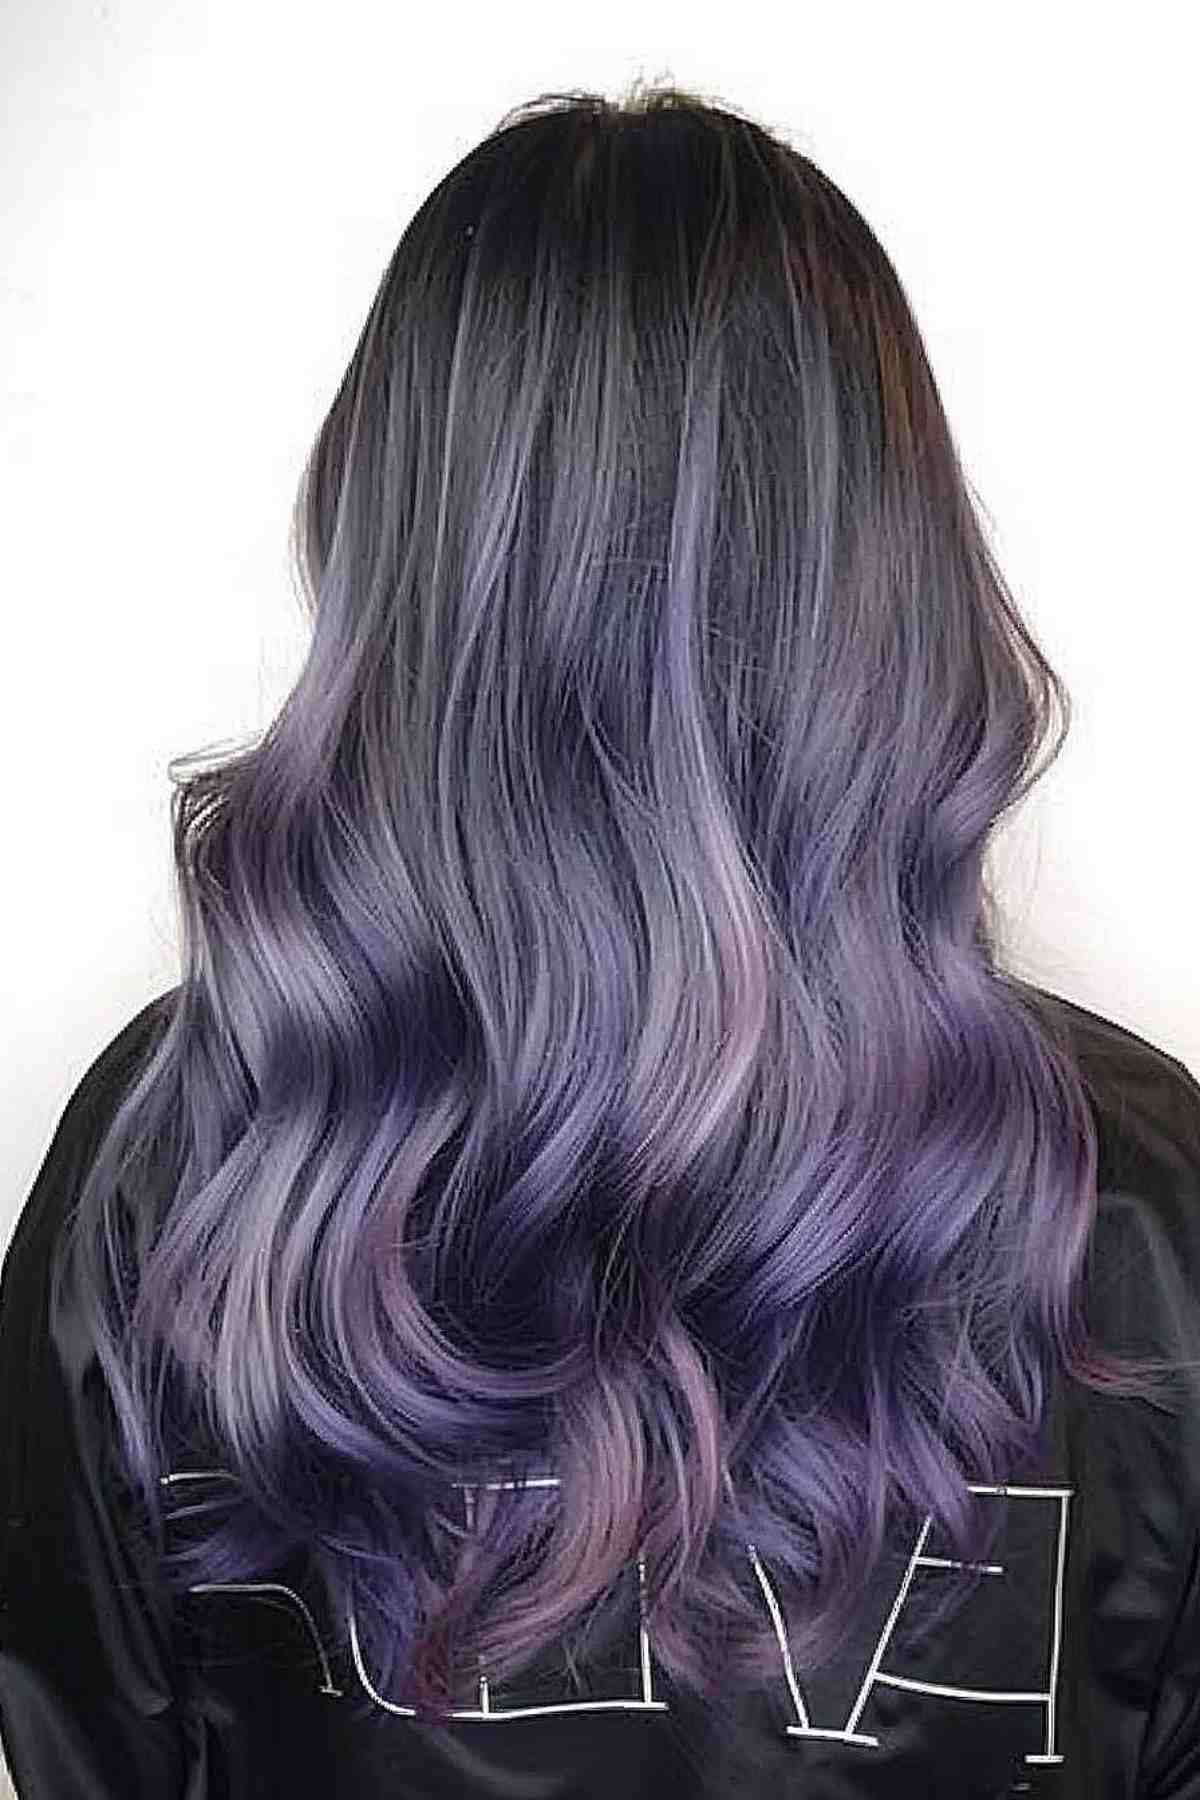 Long thick hair with wavy purple to grey ombre transition